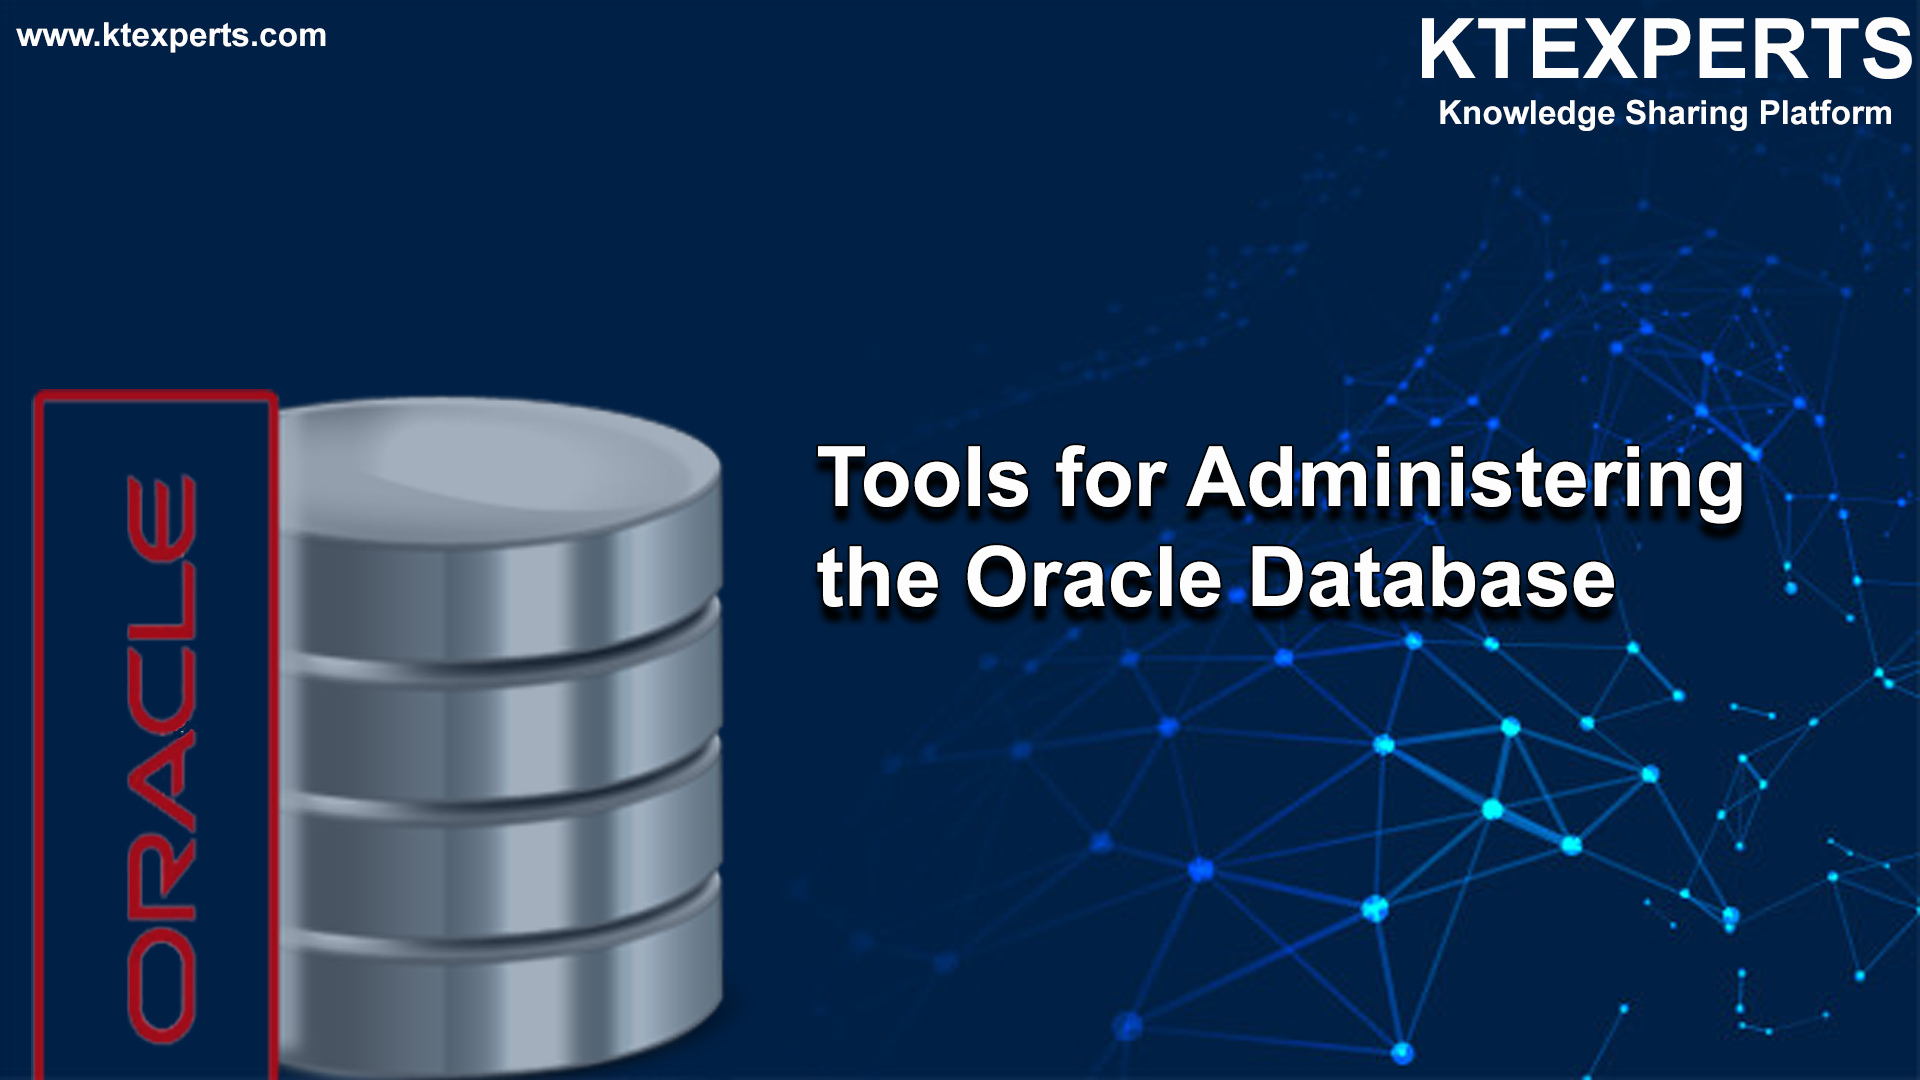 Tools for Administering the Oracle Database